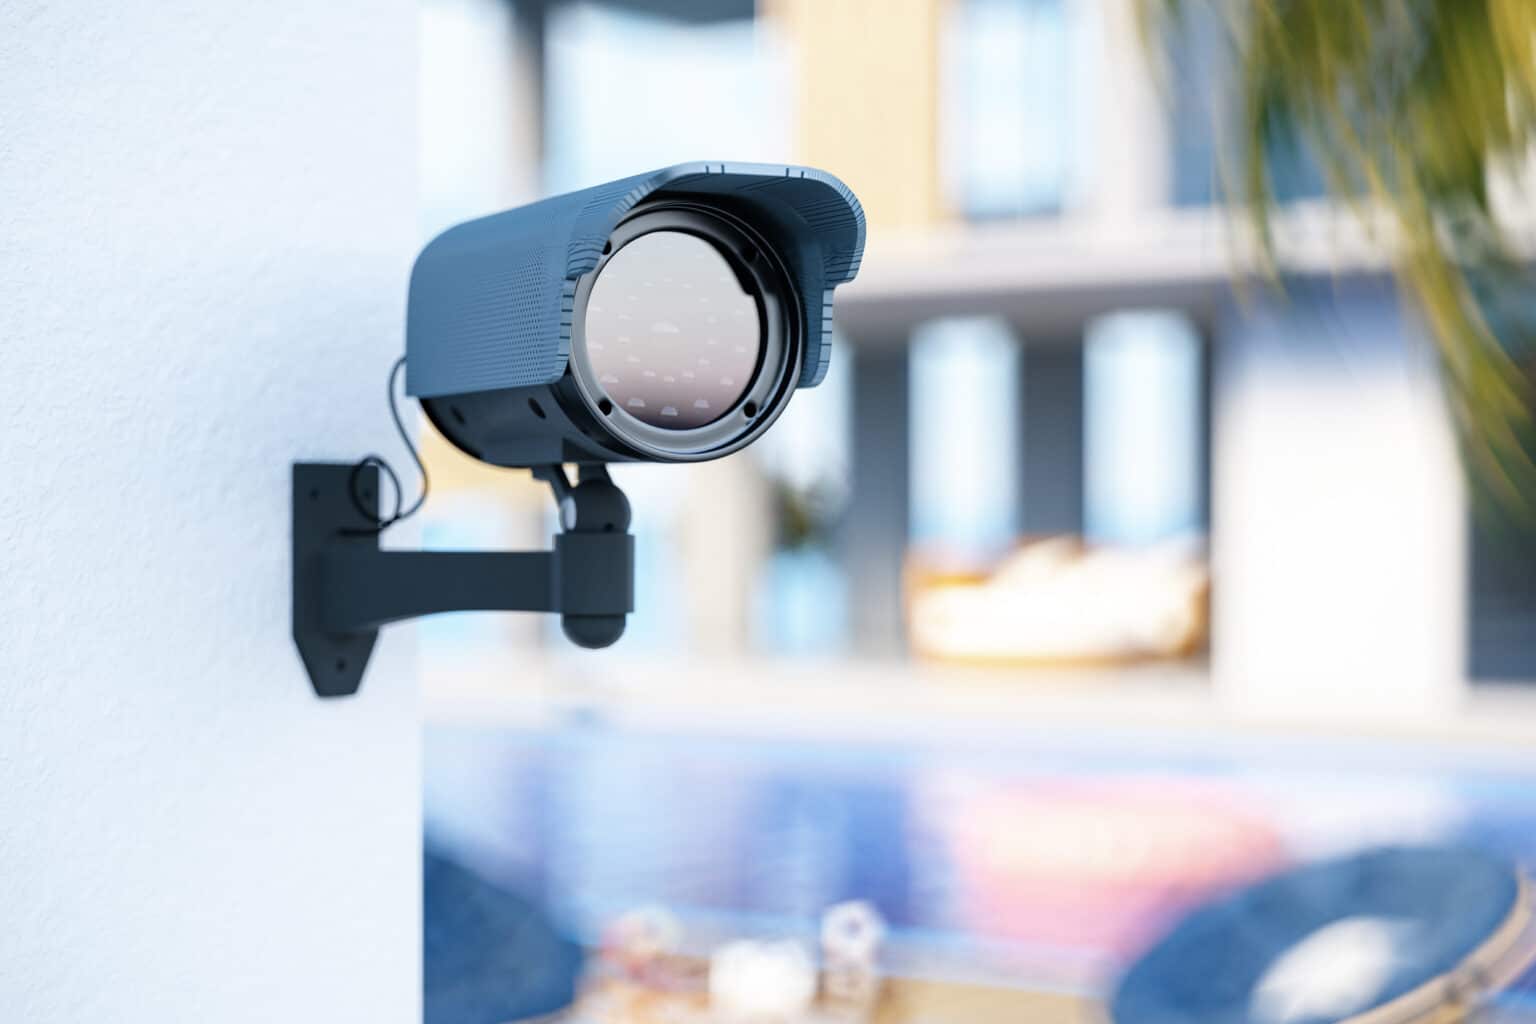 Auto Dealership Security Systems